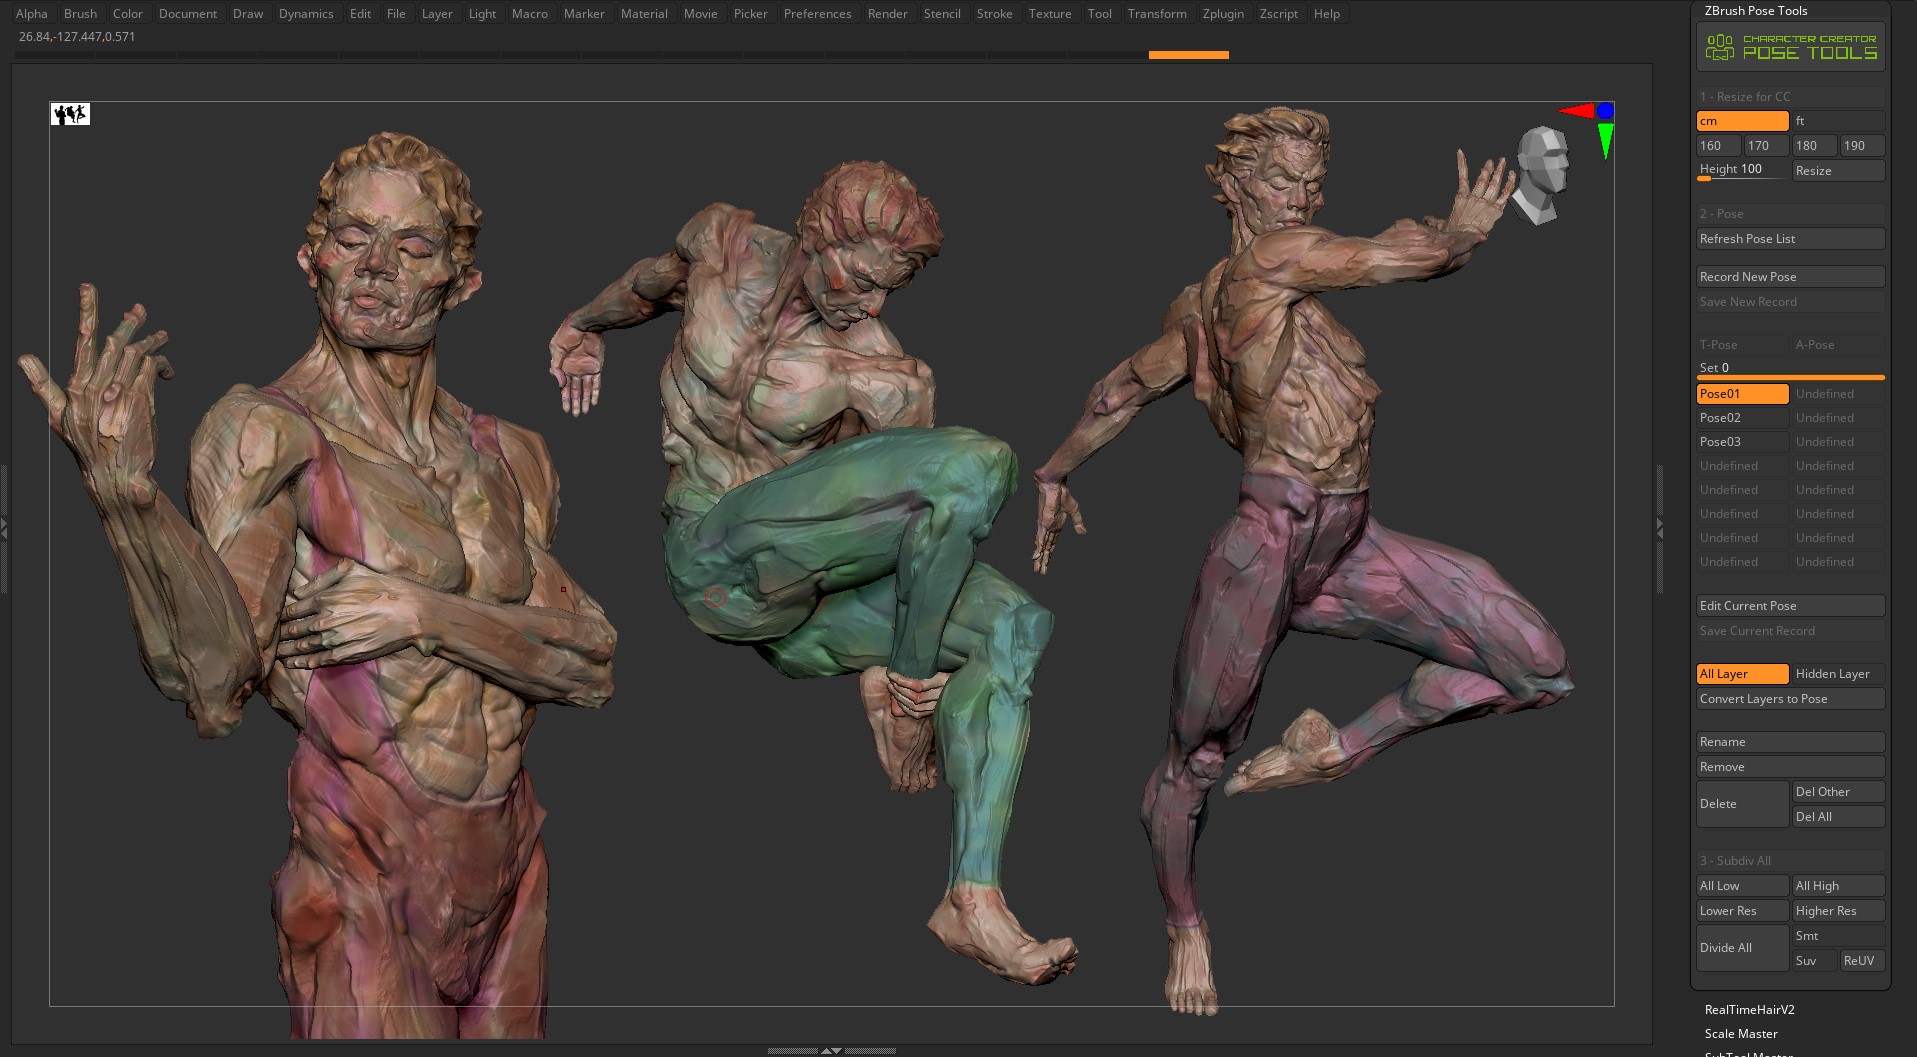 Riddick - 3D comps and model progress by FoxHound1984 on DeviantArt